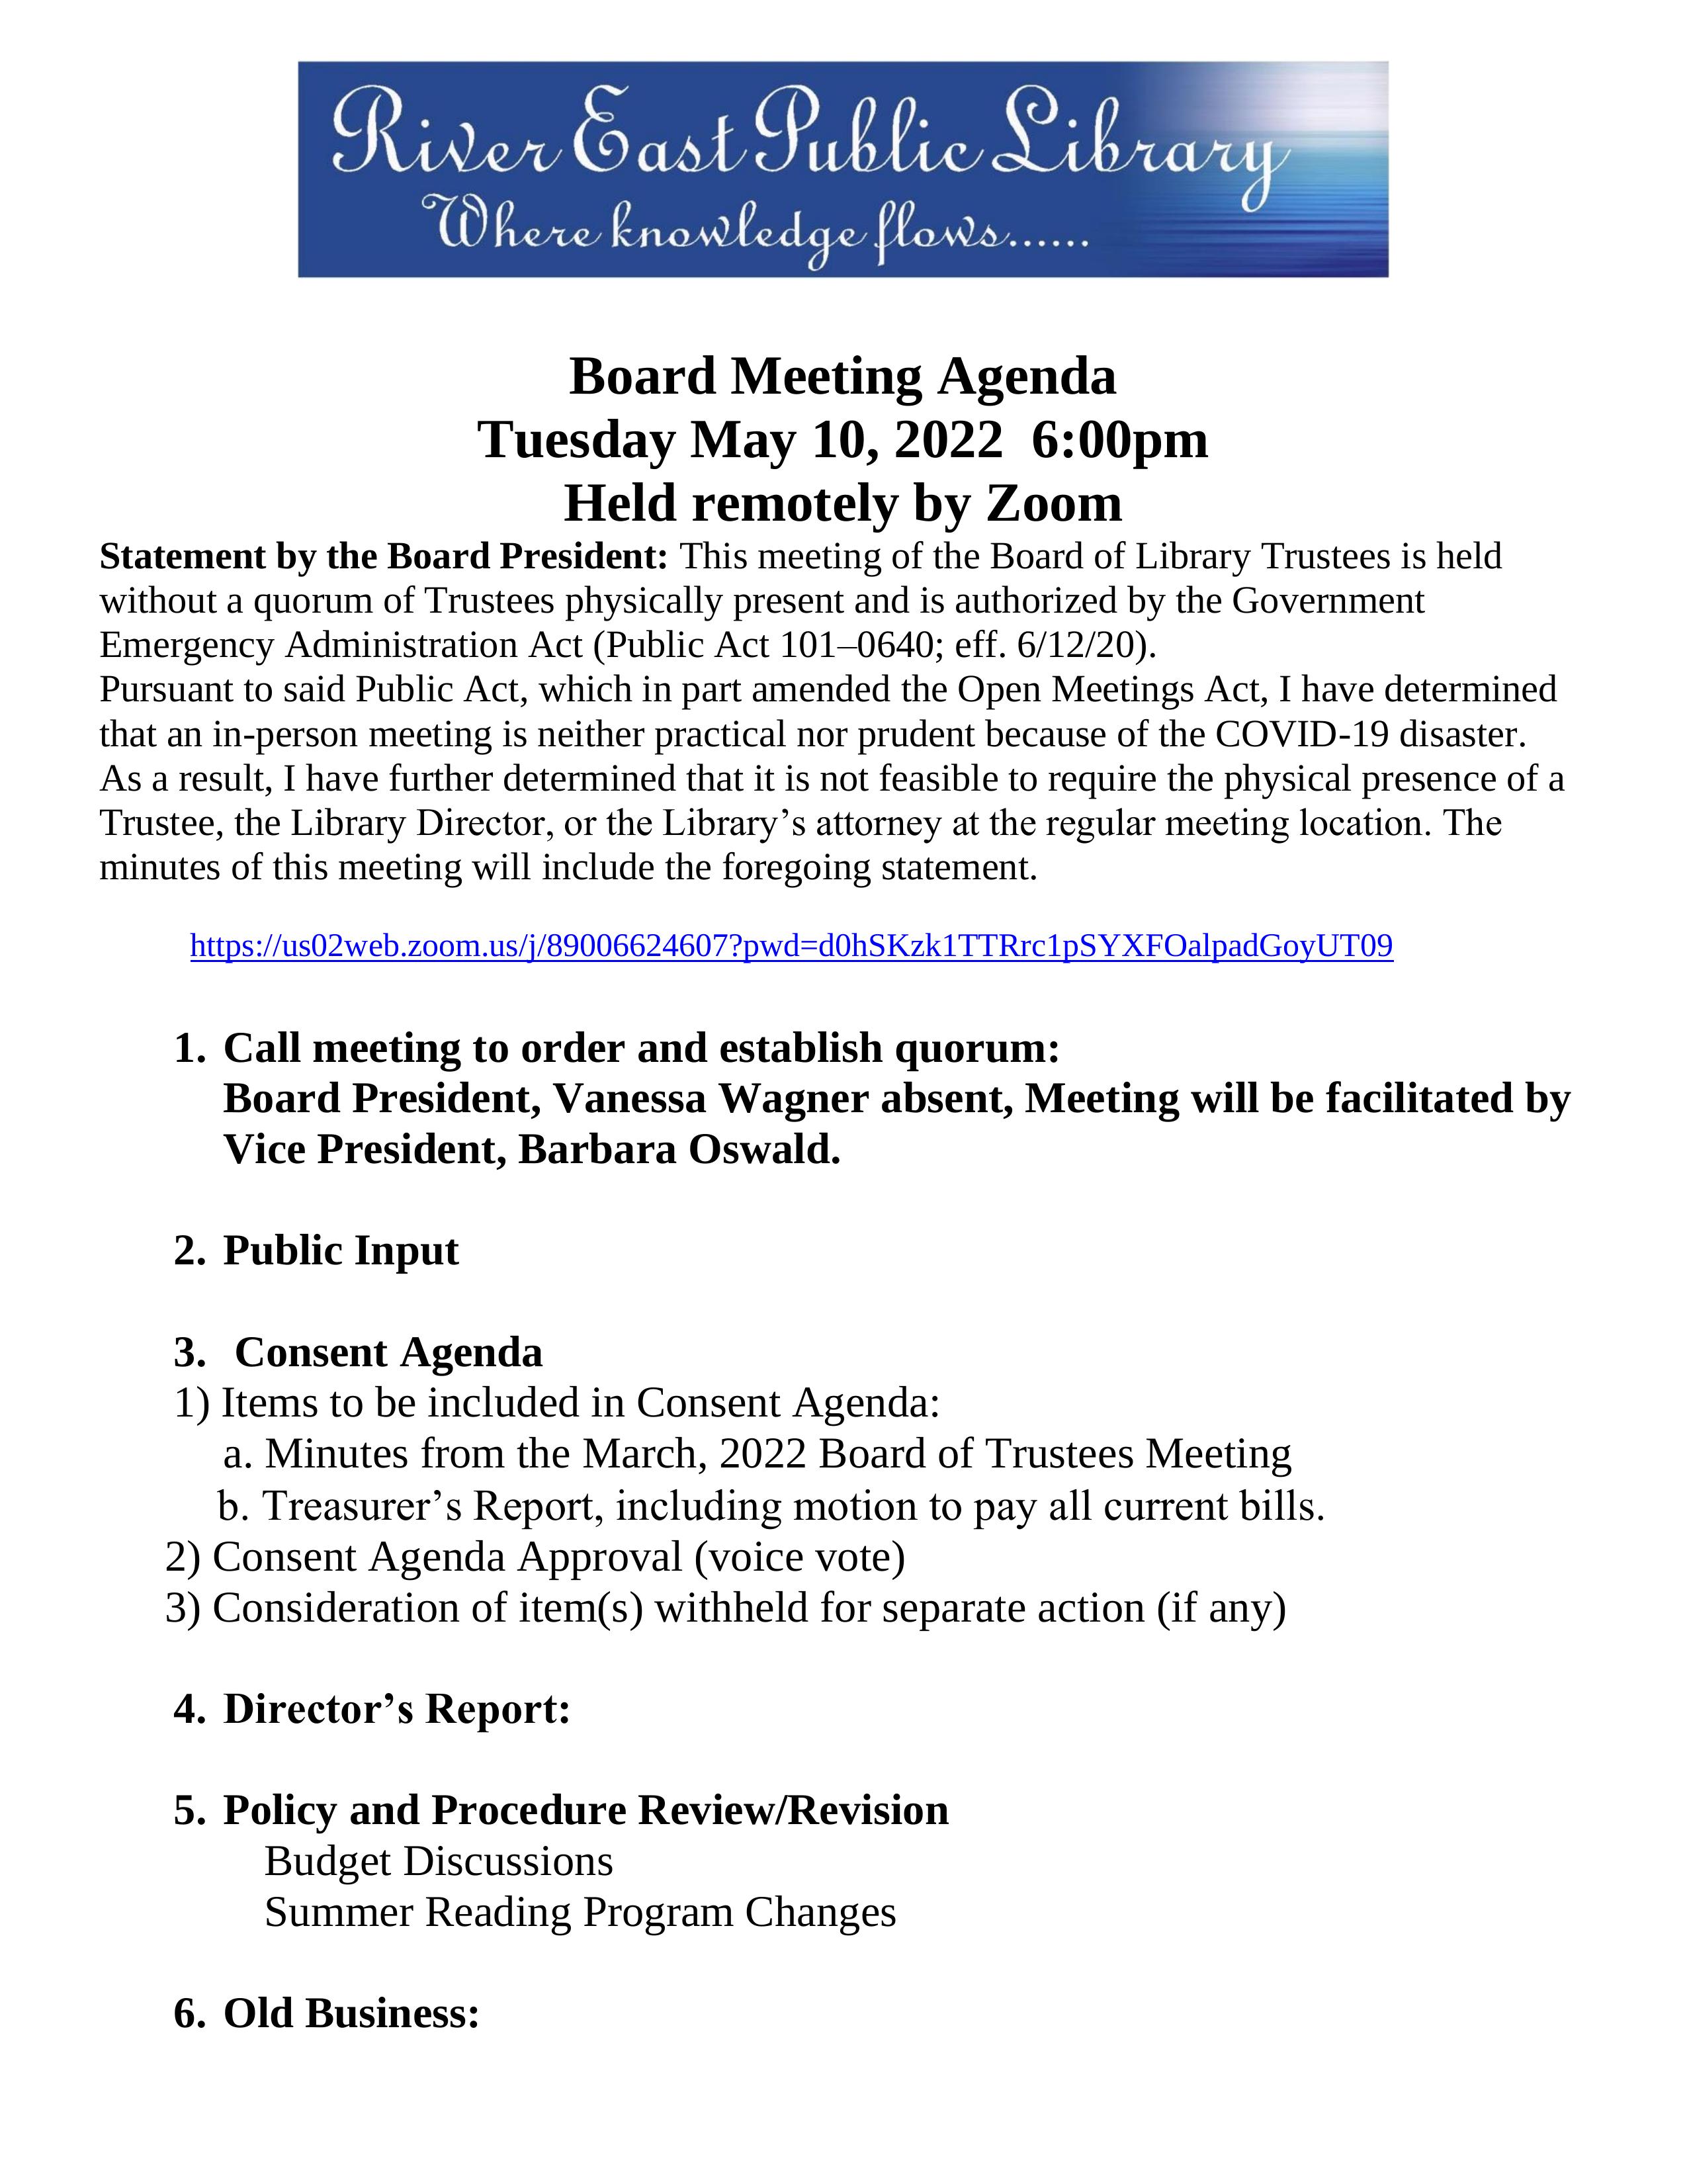 Agenda and minutes for May 2022 River East Board Meeting